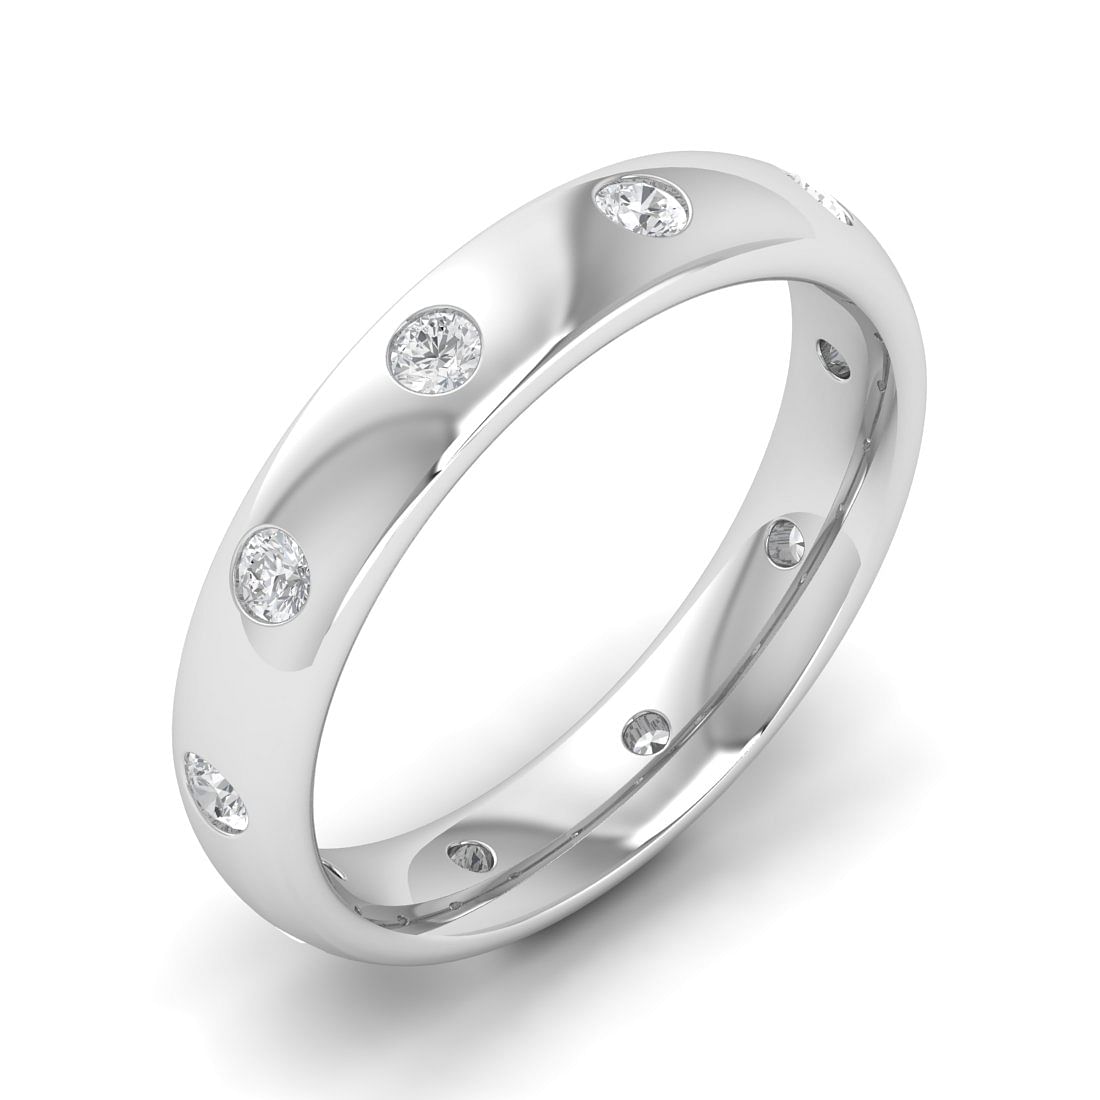 Wedding Diamond Ring With White Gold For Her